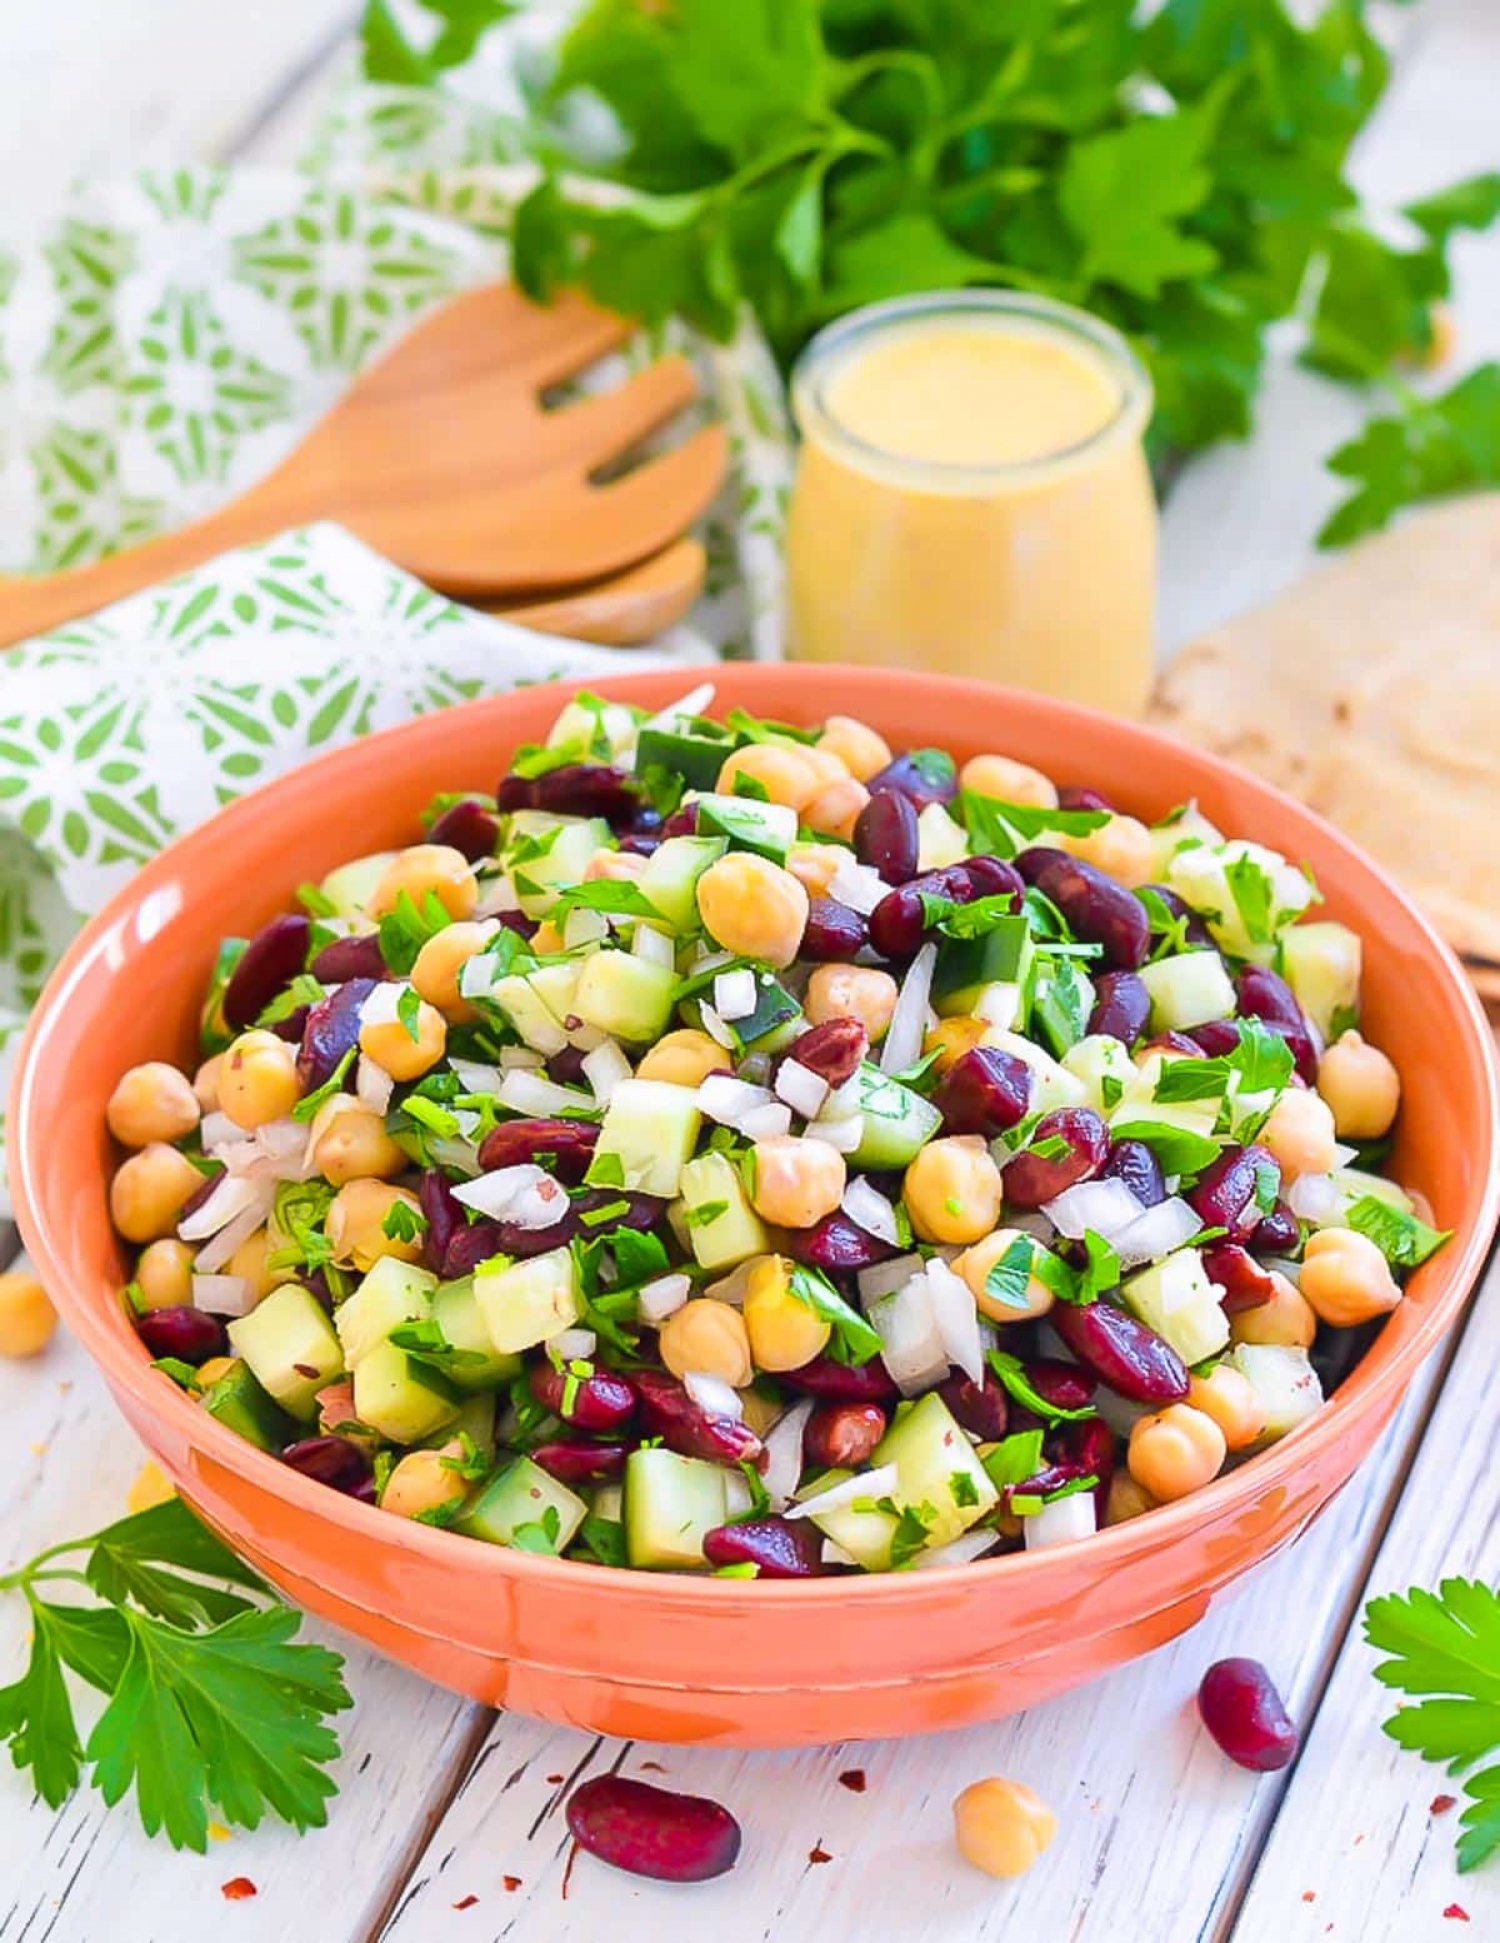 <p>Refreshing, tangy and easy to throw together, this kidney bean salad also includes chickpeas for extra protein and fiber. Tossed in a simple lemon dressing, it's ready in just 10 minutes—perfect for your weekly meal prep for light and healthy lunches. <a href="https://avirtualvegan.com/kidney-bean-salad-lemon-parsley/" rel="noopener">Get the recipe here.</a></p>